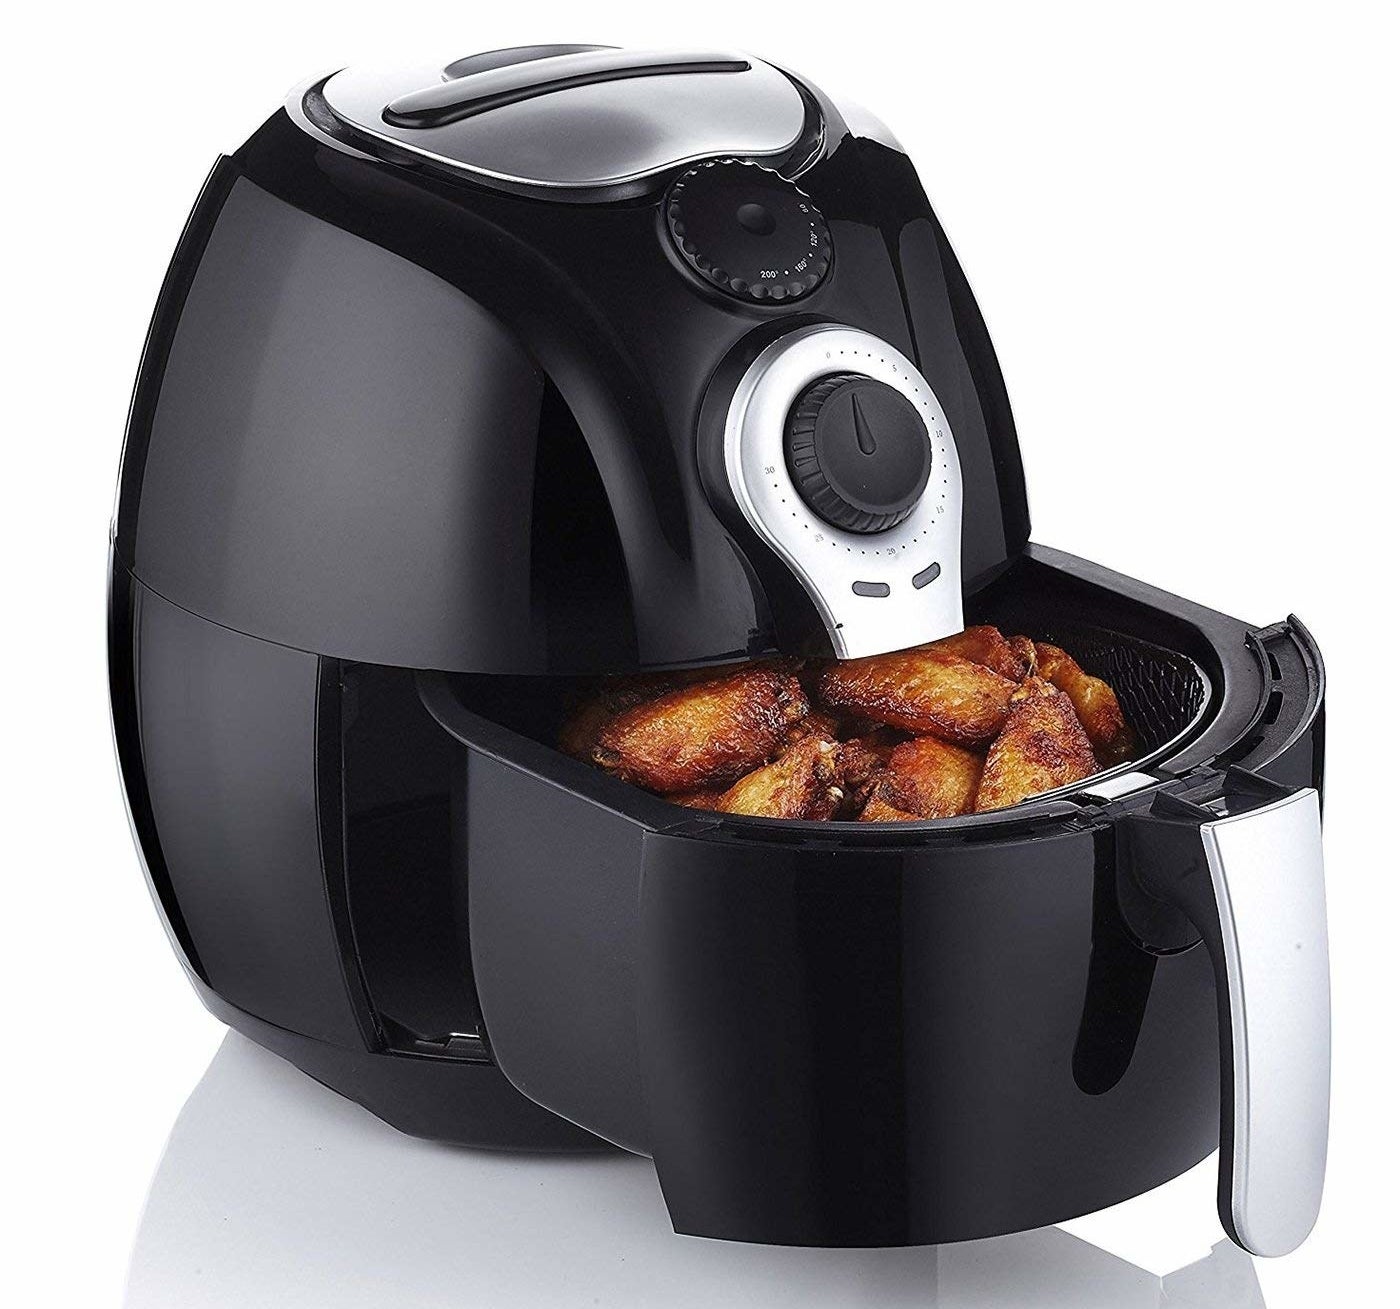 The black air fryer with wings in its pull-out drawer